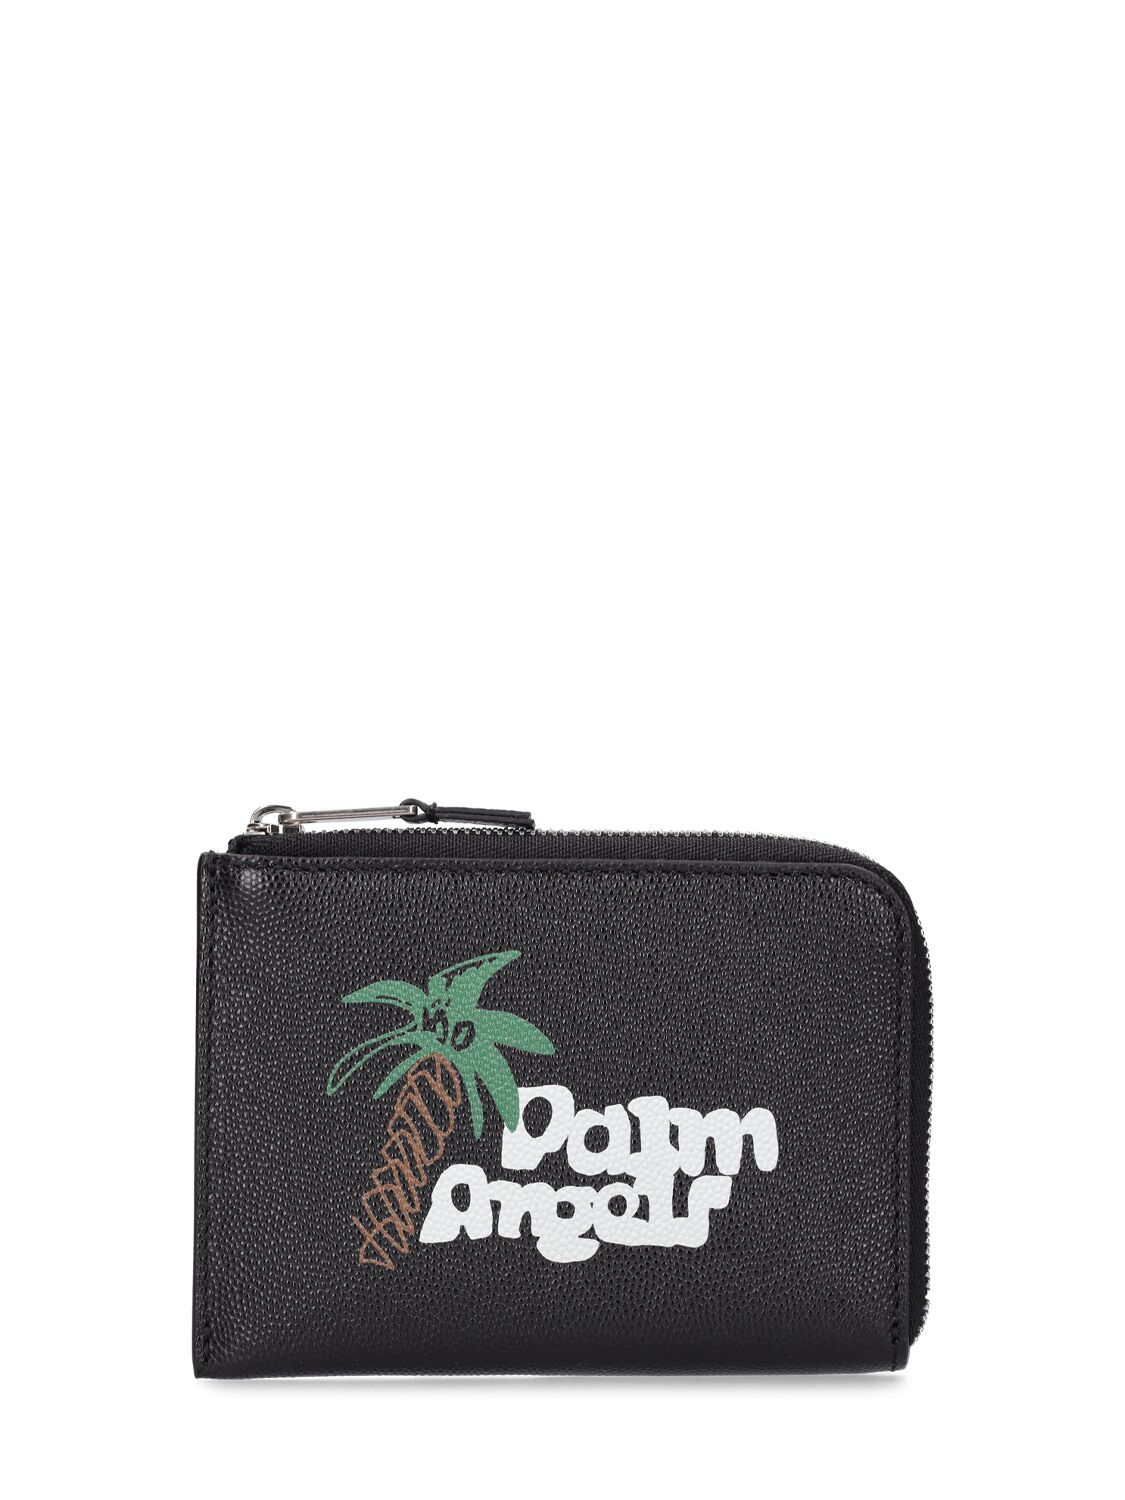 PALM ANGELS SKETCHY LEATHER ZIP CARD HOLDER